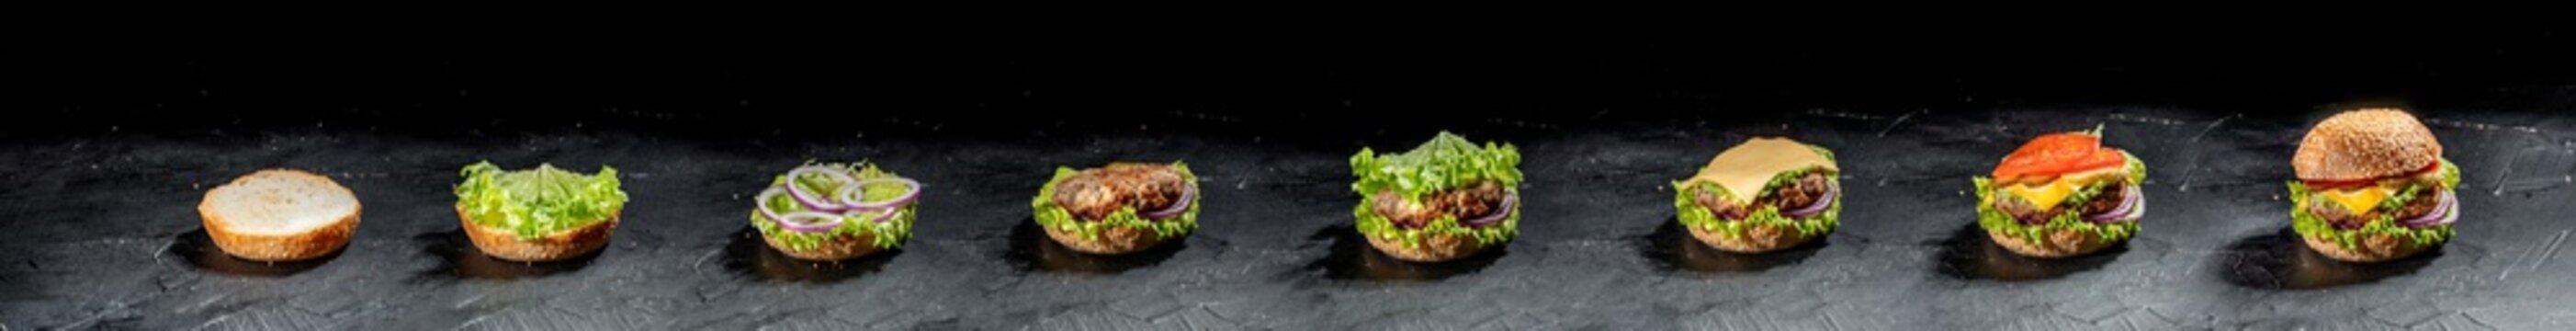 Delicious burger with cheese and vegetables on the dark background